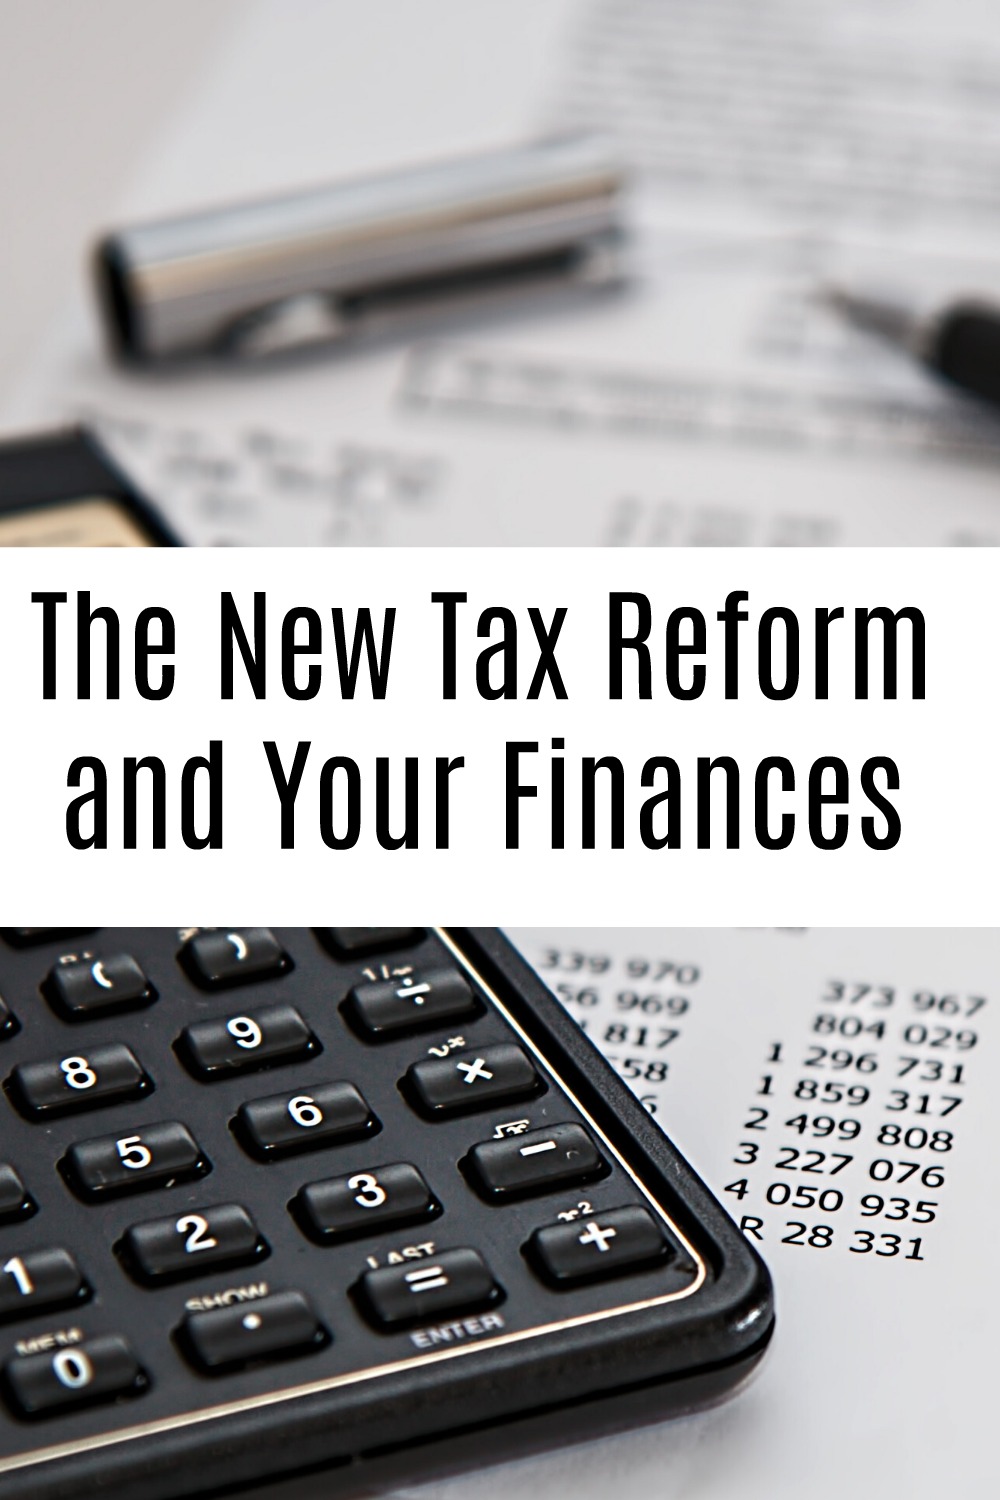 The New Tax Reform and Your Finances